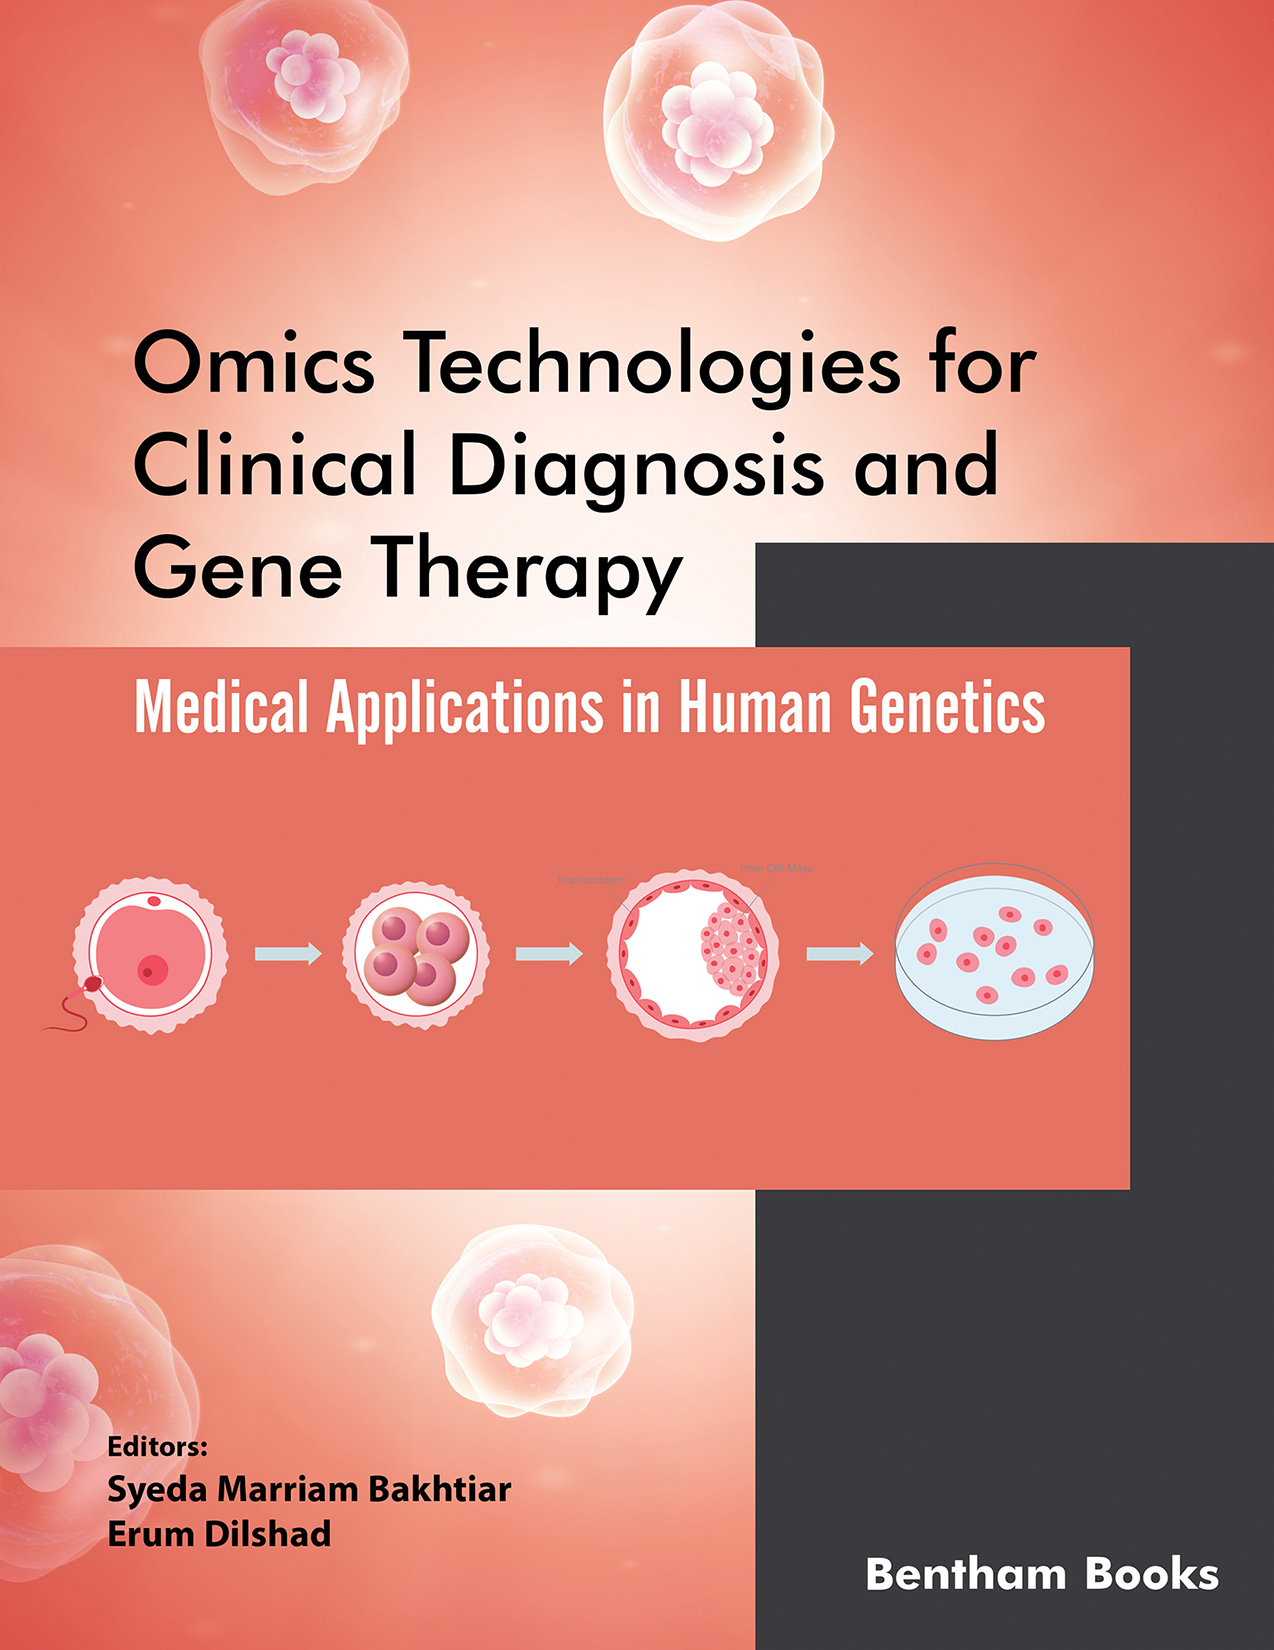 Omics Technologies for Clinical Diagnosis and Gene Therapy: Medical Applications in Human Genetics